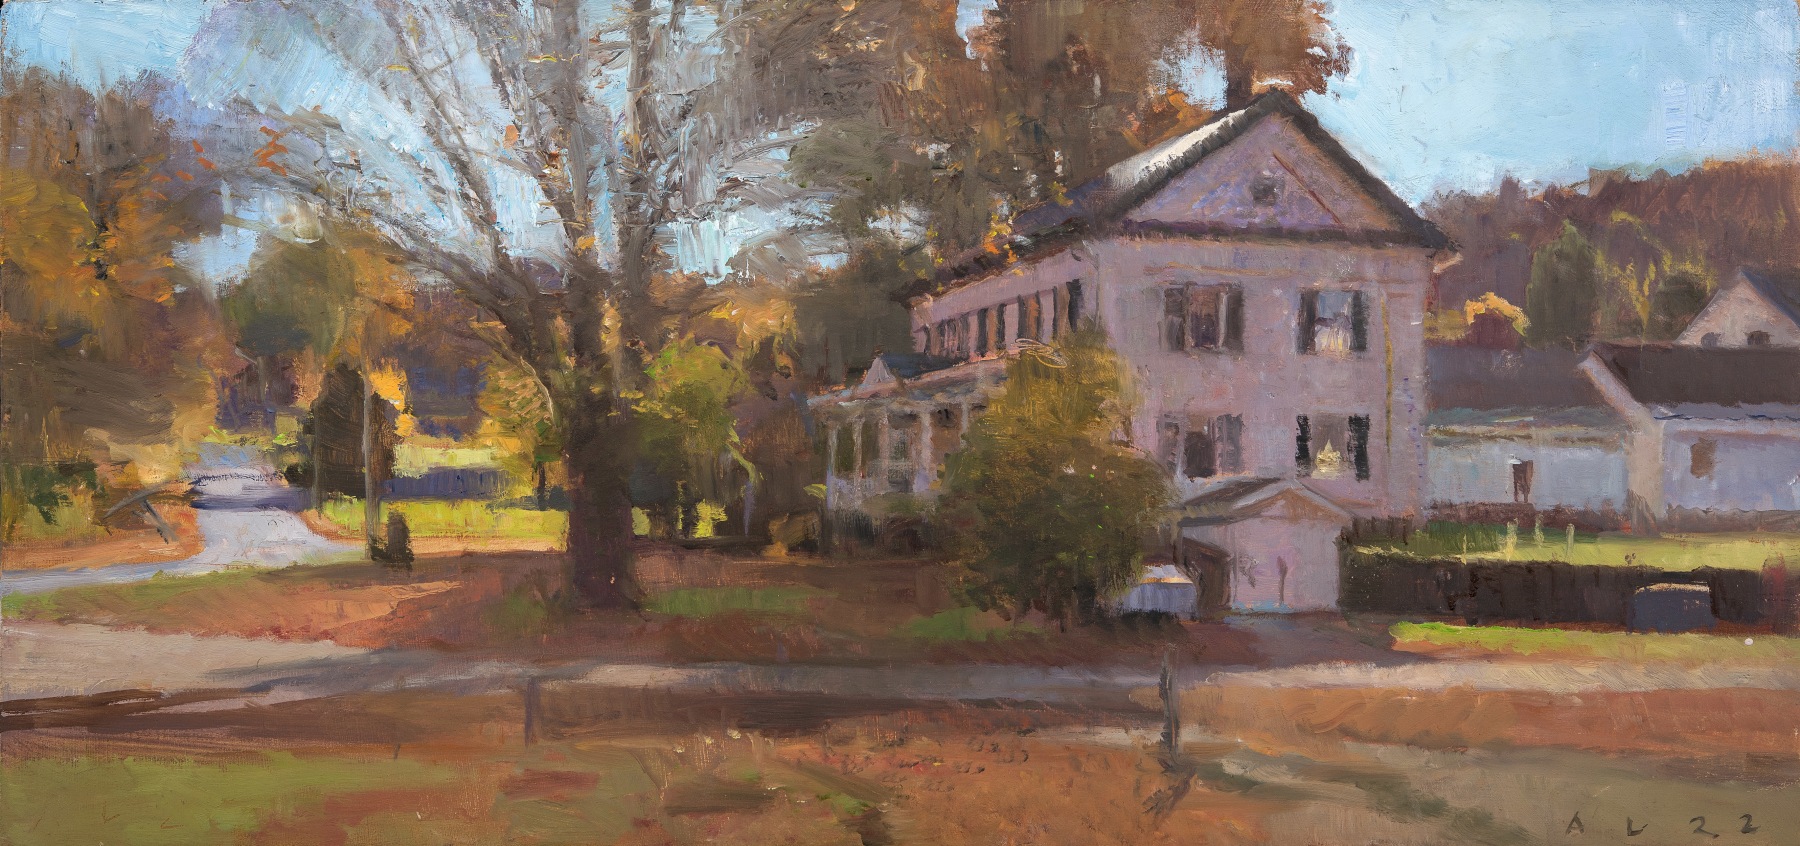 Ann Lofquist - Passing Observations - Exhibitions - Gross McCleaf Gallery